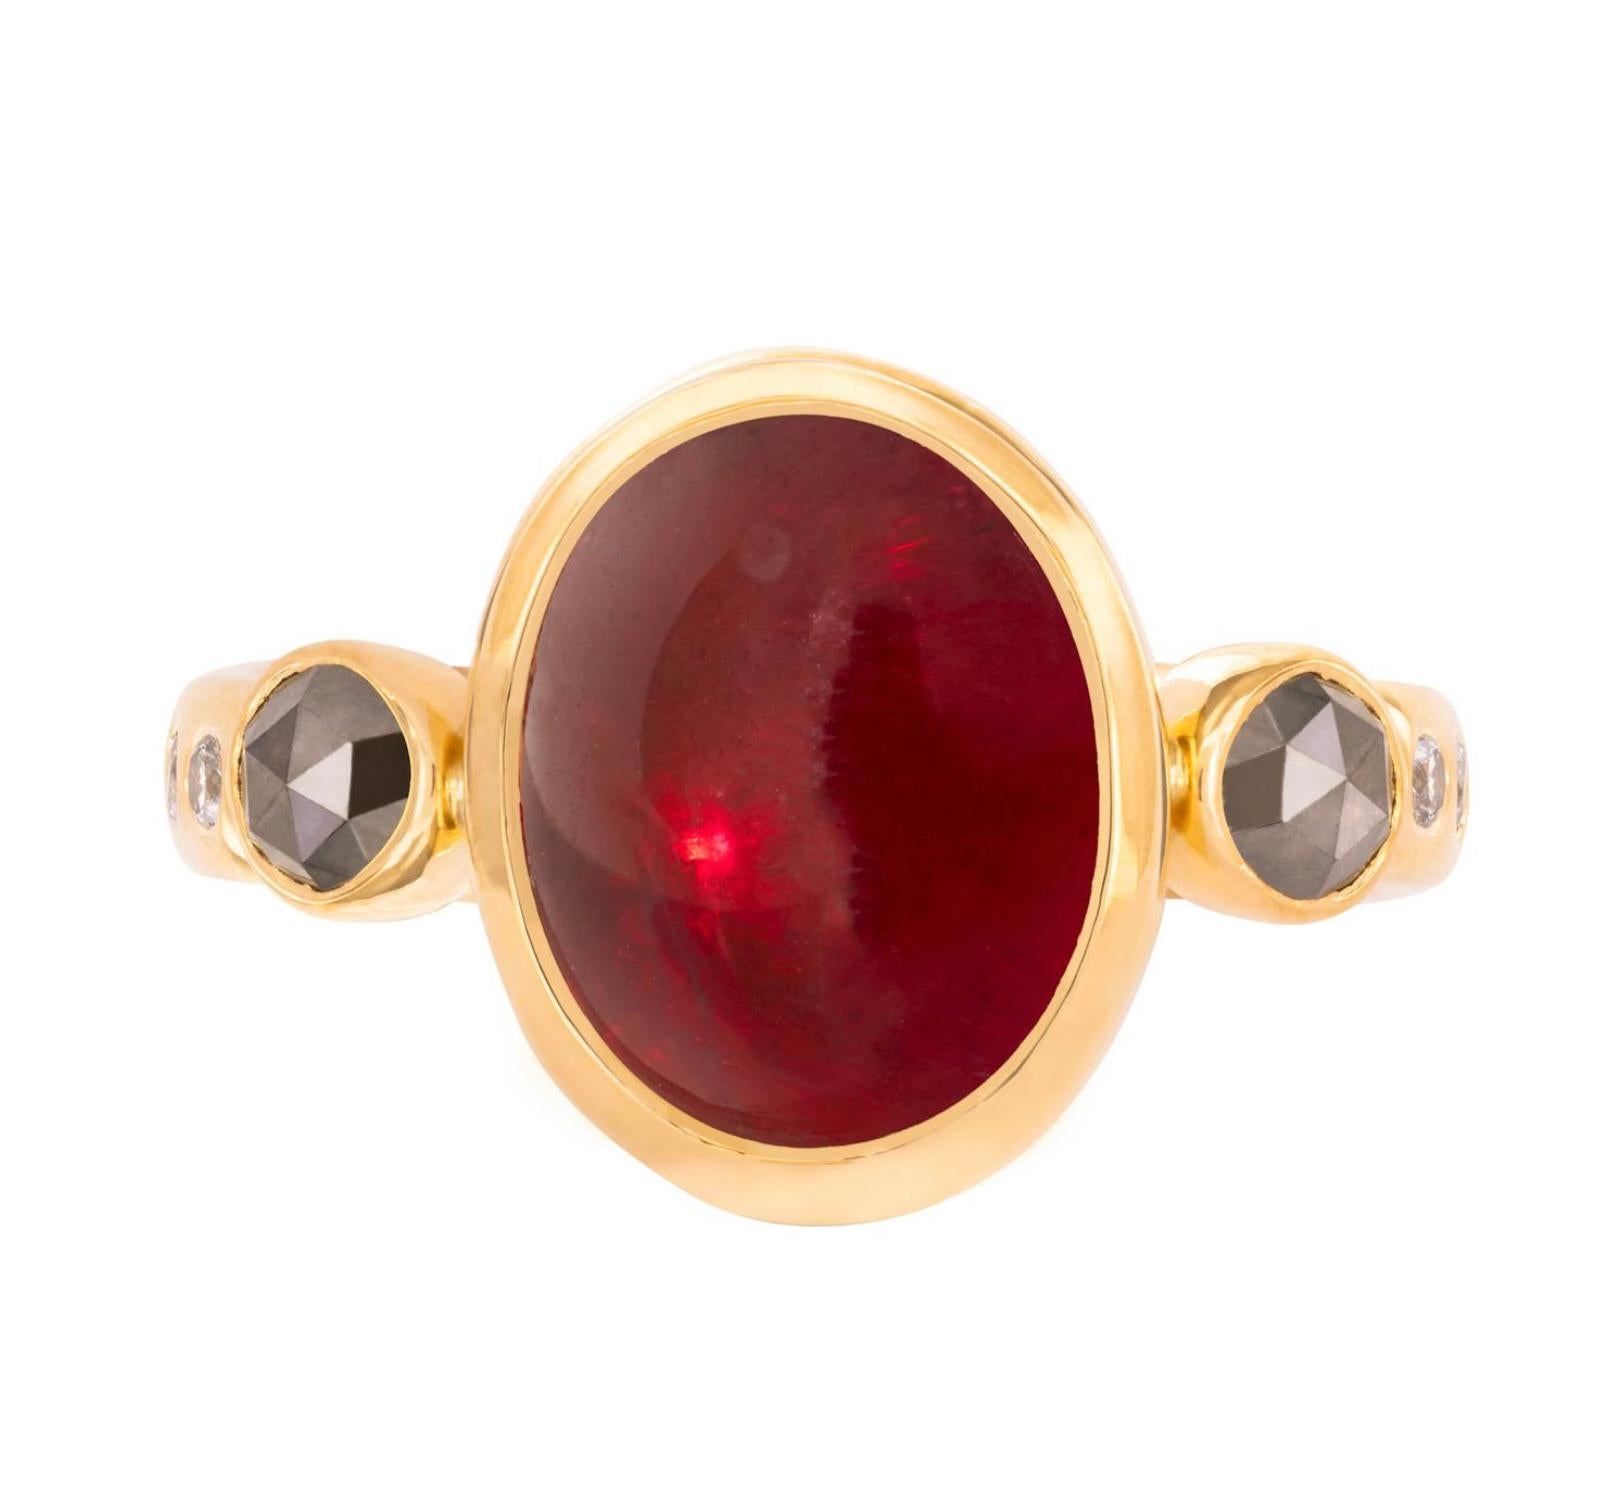 From the Tale of Five Rings Collection, this 22K gold ring has a stunning  5.79 carat smooth, rubellite tourmaline cabochon, 3mm rose cut grey side diamonds, 1.6mm brilliant grey diamonds surrounding the band. This ring is completely hand crafted